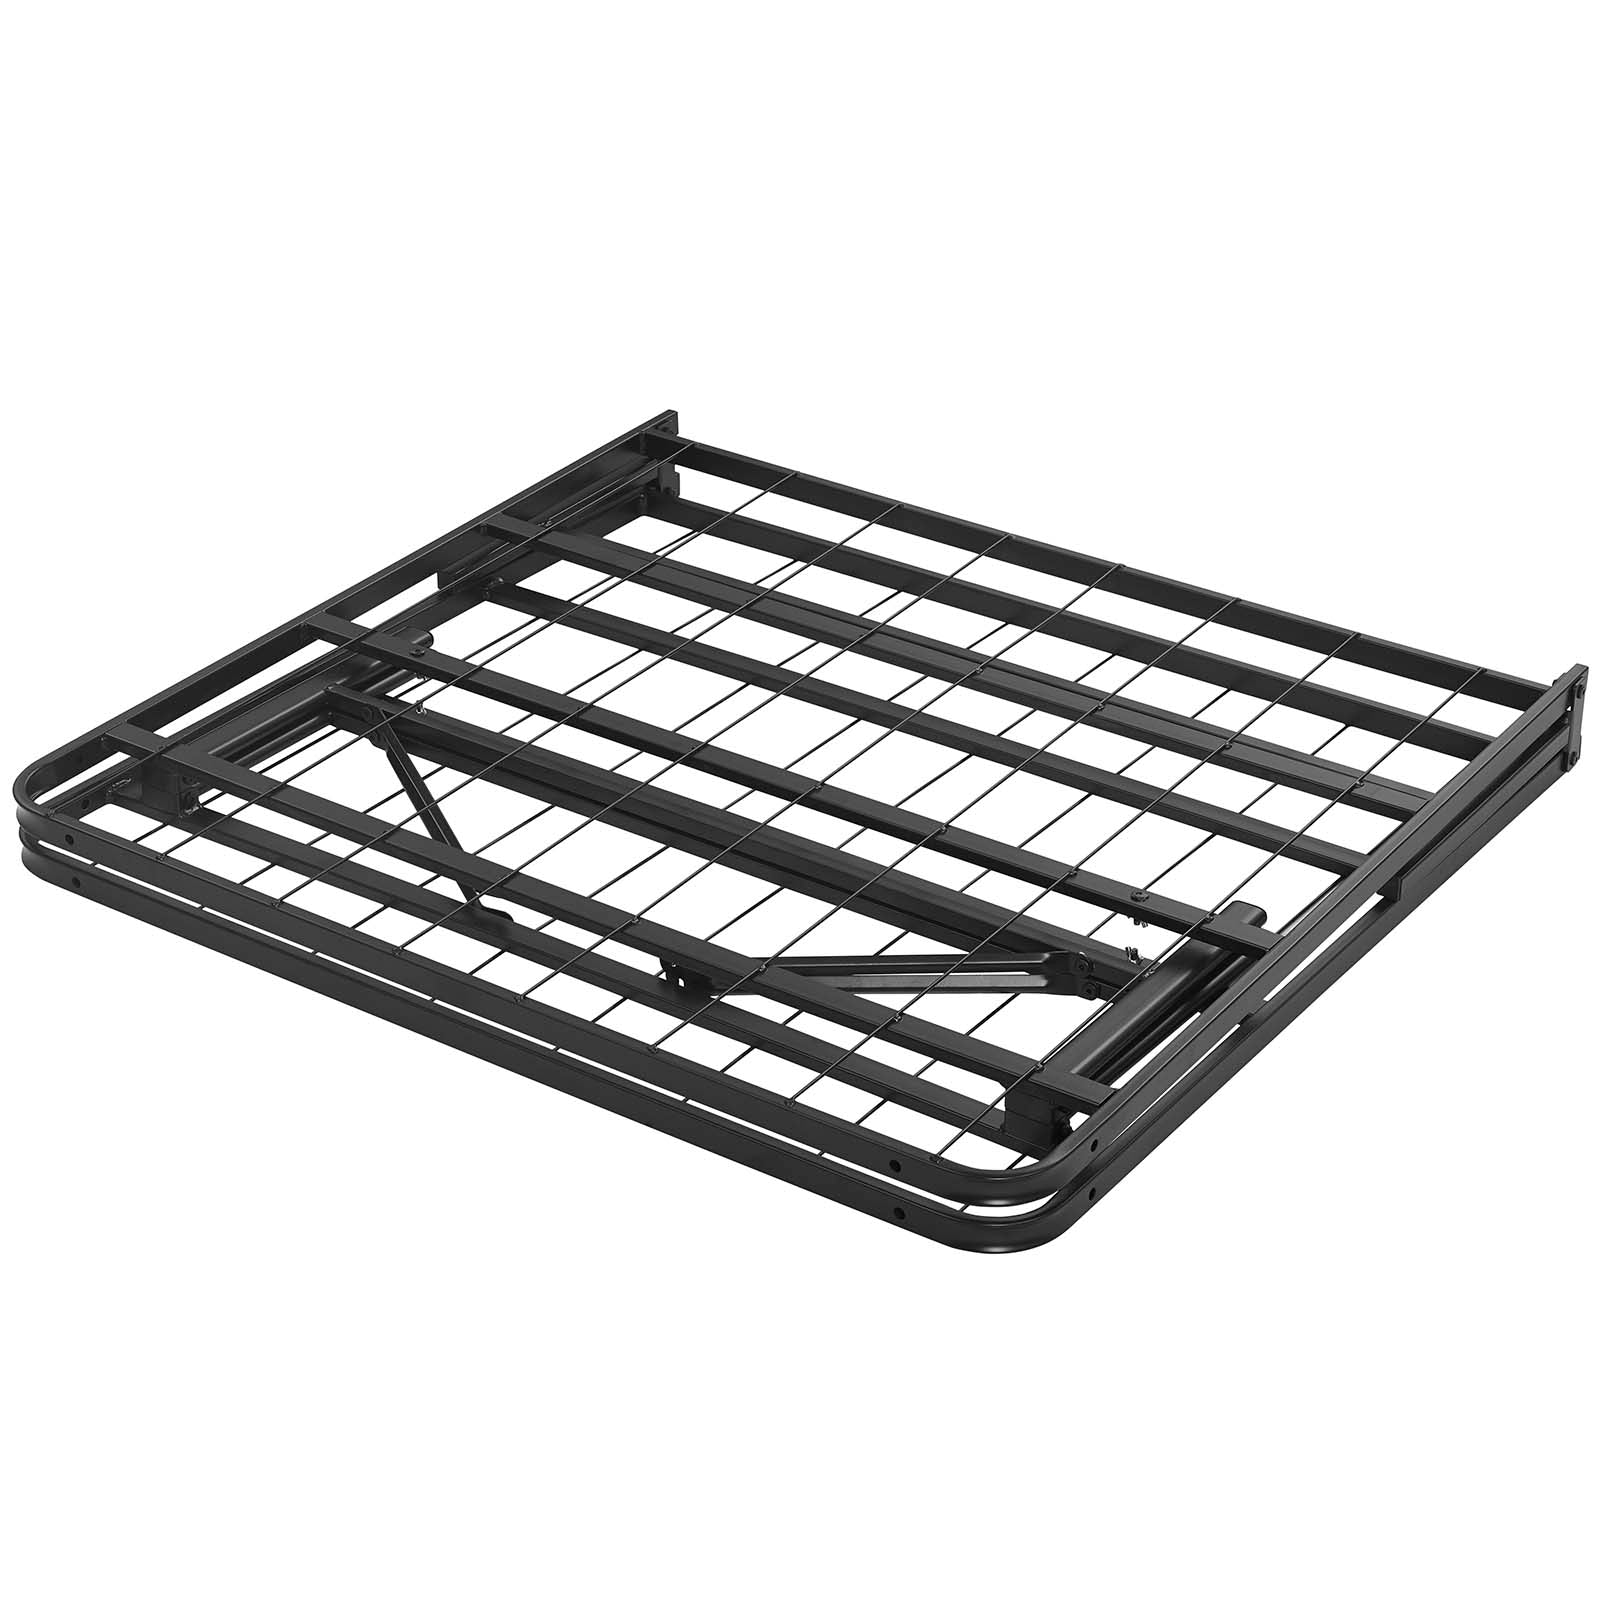 Modway Beds - Horizon Twin Stainless Steel Bed Frame Brown